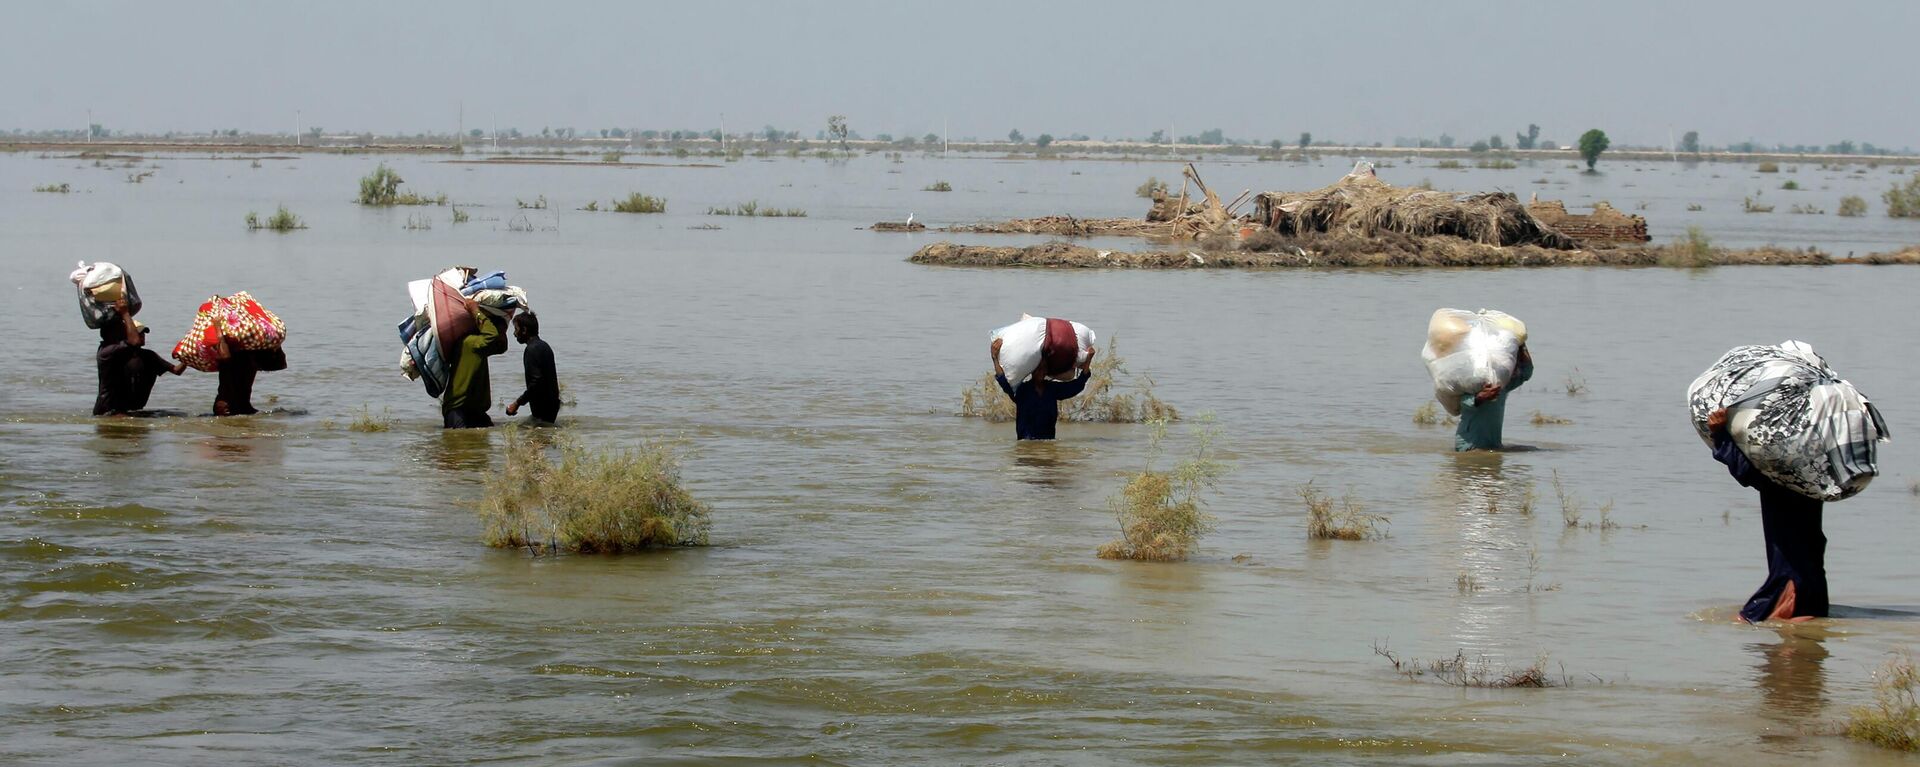 FILE - Victims of heavy flooding from monsoon rains crowd carry relief aid through flood water in the Qambar Shahdadkot district of Sindh Province, Pakistan, Sept. 9, 2022 - Sputnik International, 1920, 14.09.2022